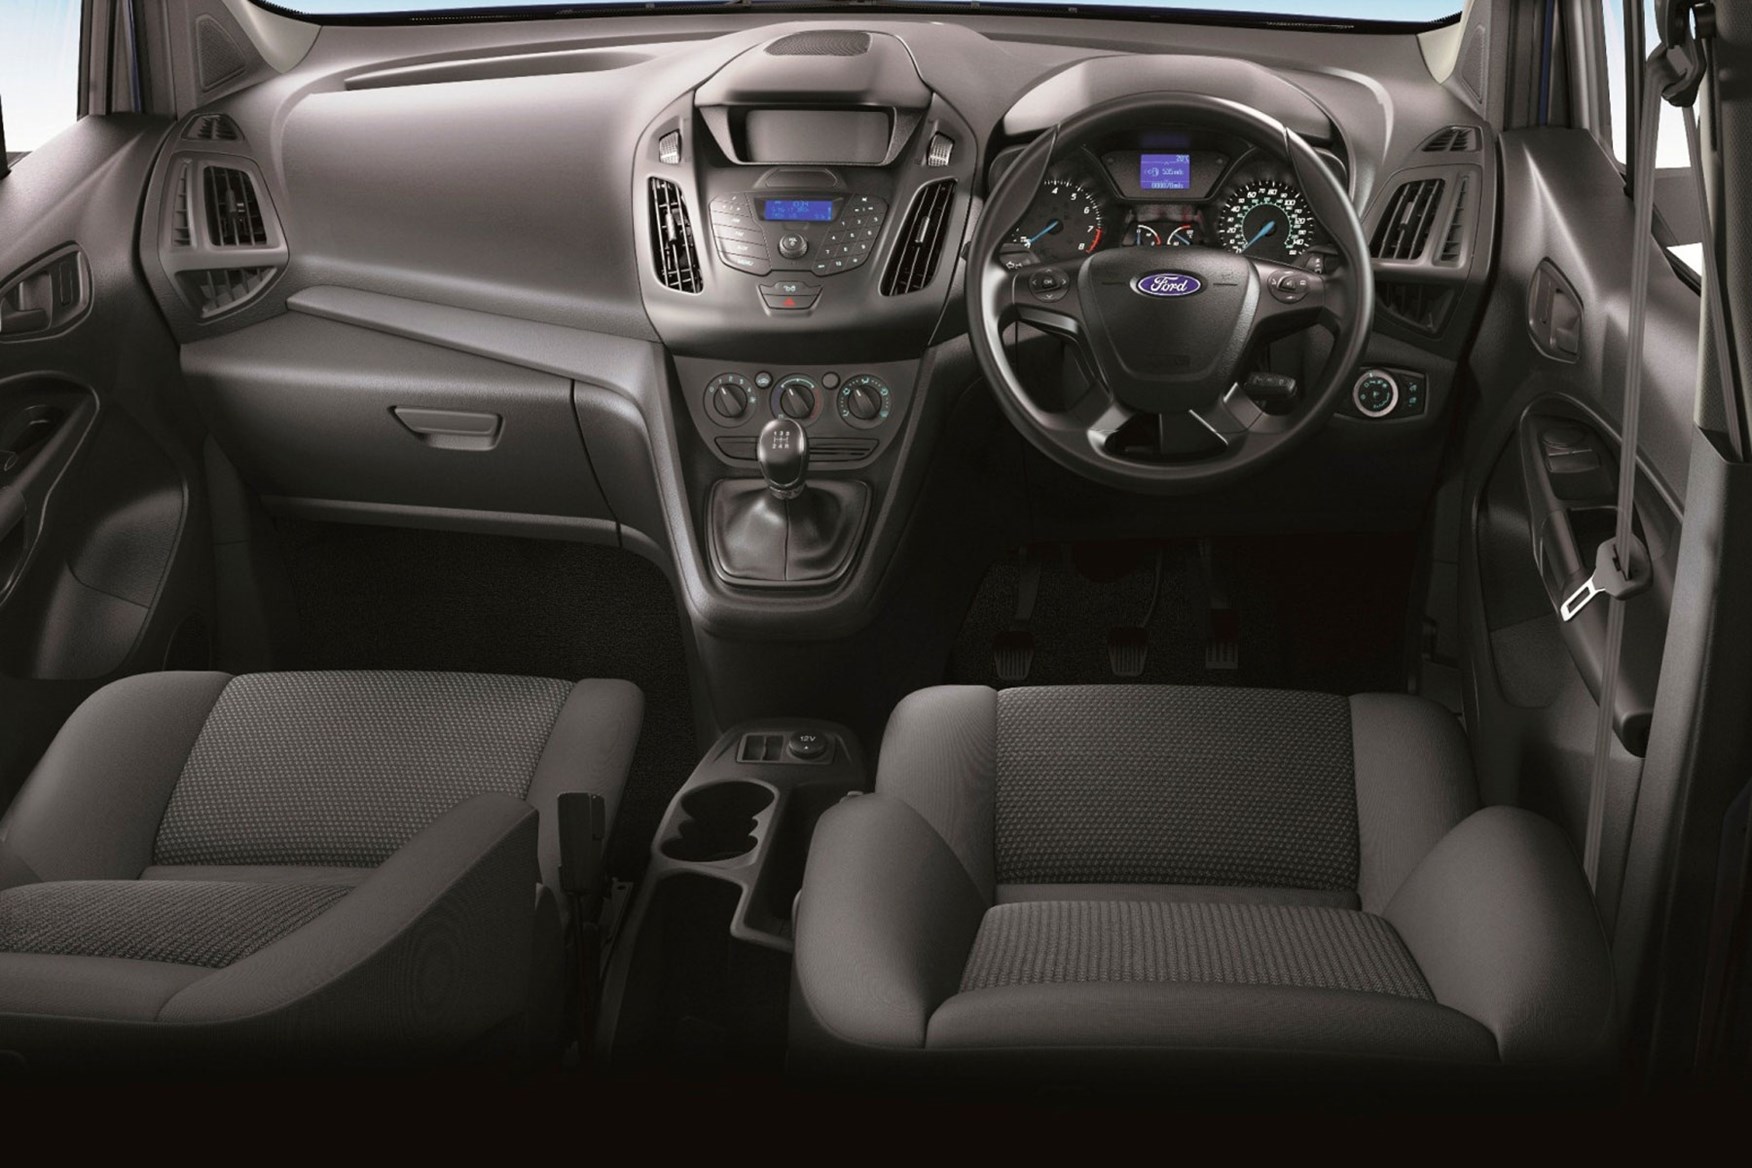 Ford Transit Connect review - 2013 cab interior showing steering wheel and dashboard, basic radio, lots of buttons